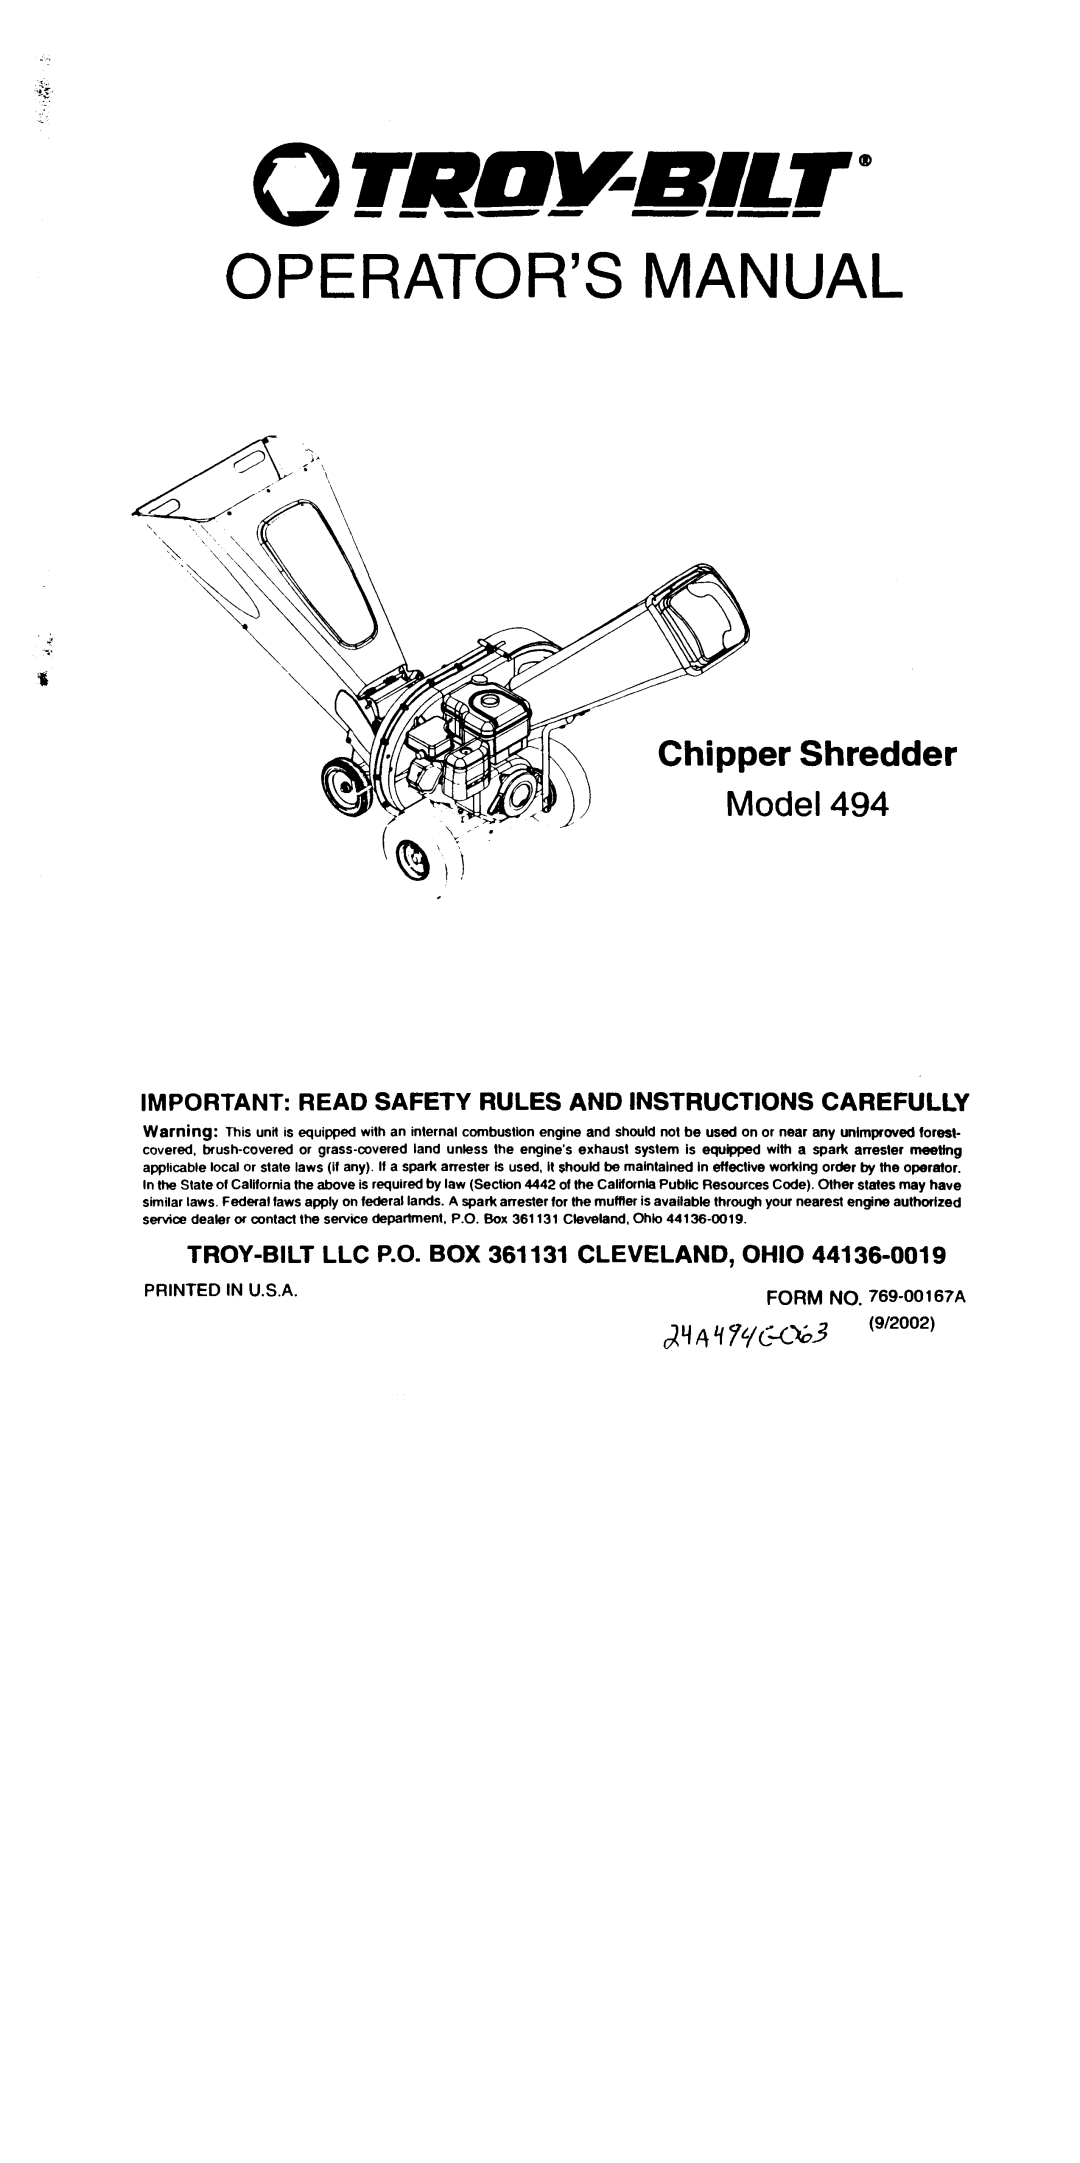 Troy-Bilt 494 manual Operator’S Manual, Chipper Shredder, Model, Important Read Safety Rules And Instructions Carefully 